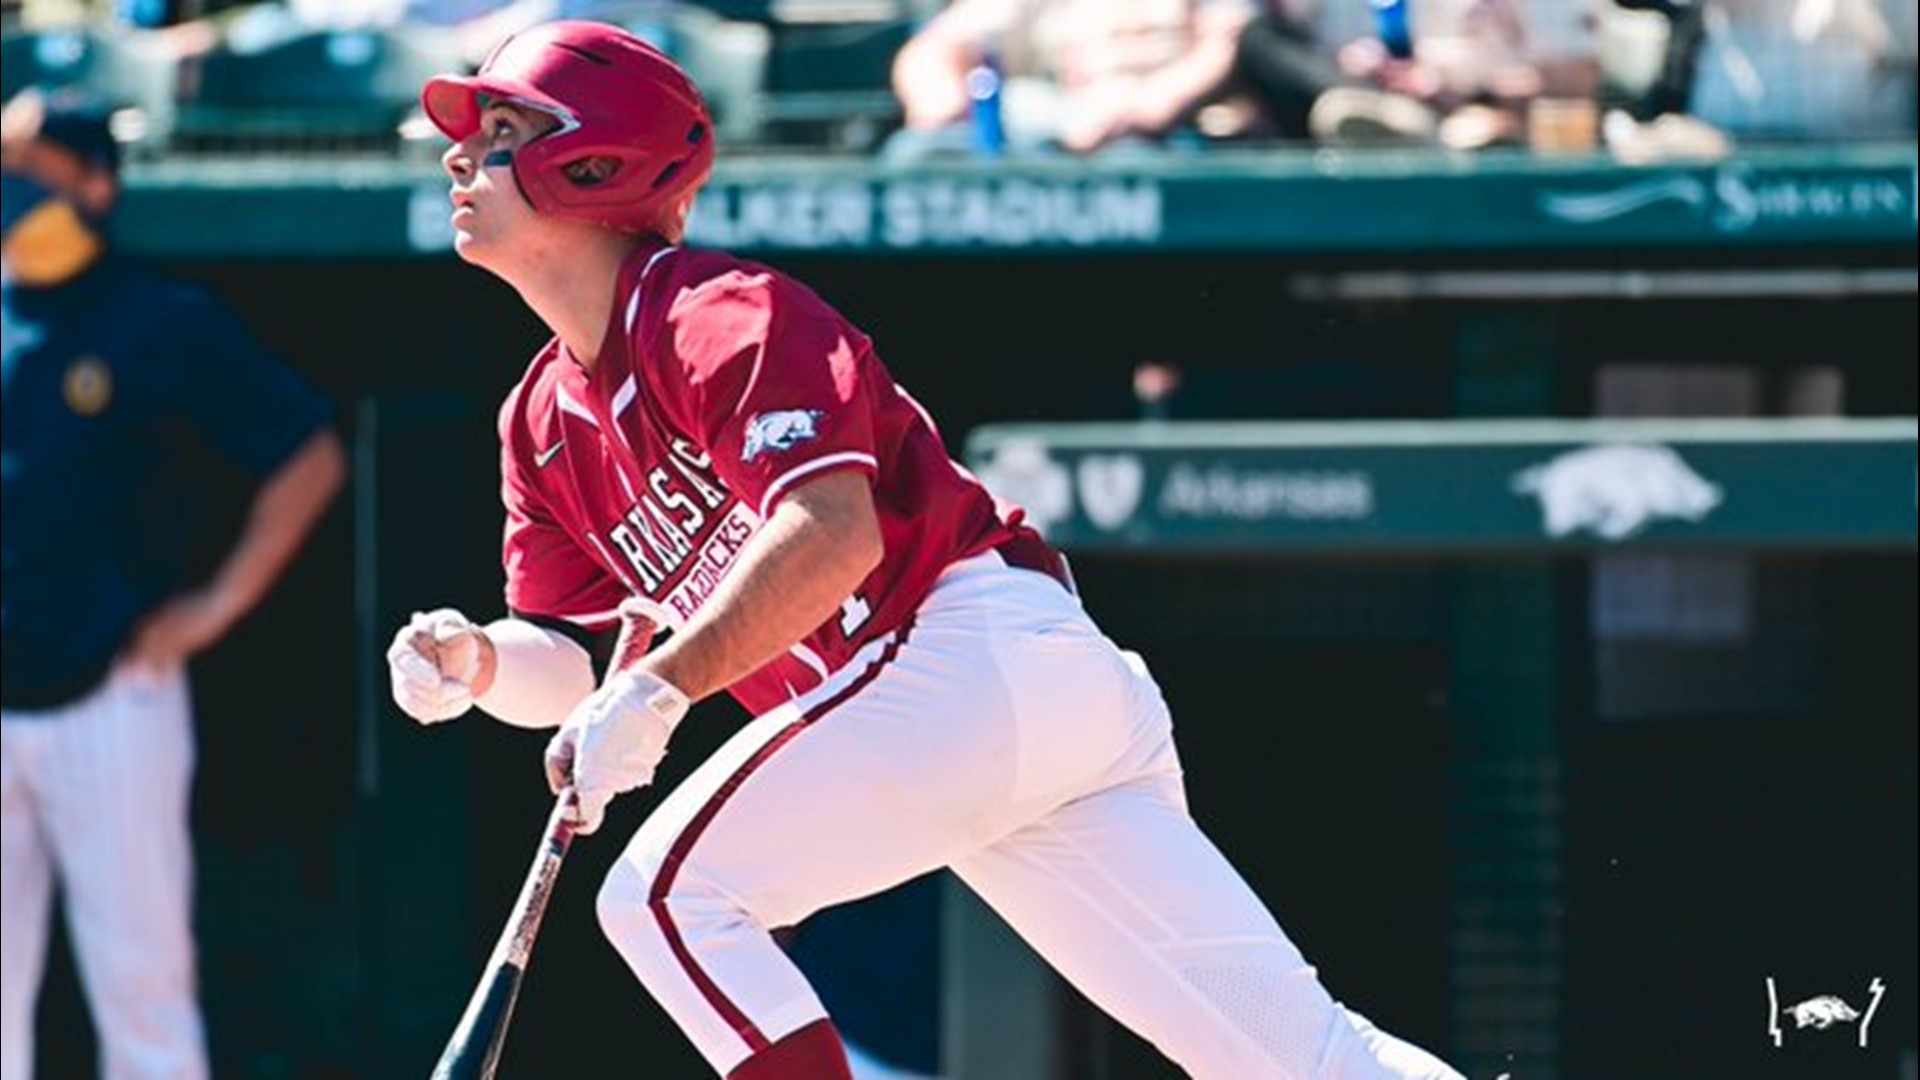 Arkansas got 5.2 innings from starter Patrick Wicklander, who scattered six hits and struck out nine while Robert Moore went 2-3 with two doubles, two RBI and a run